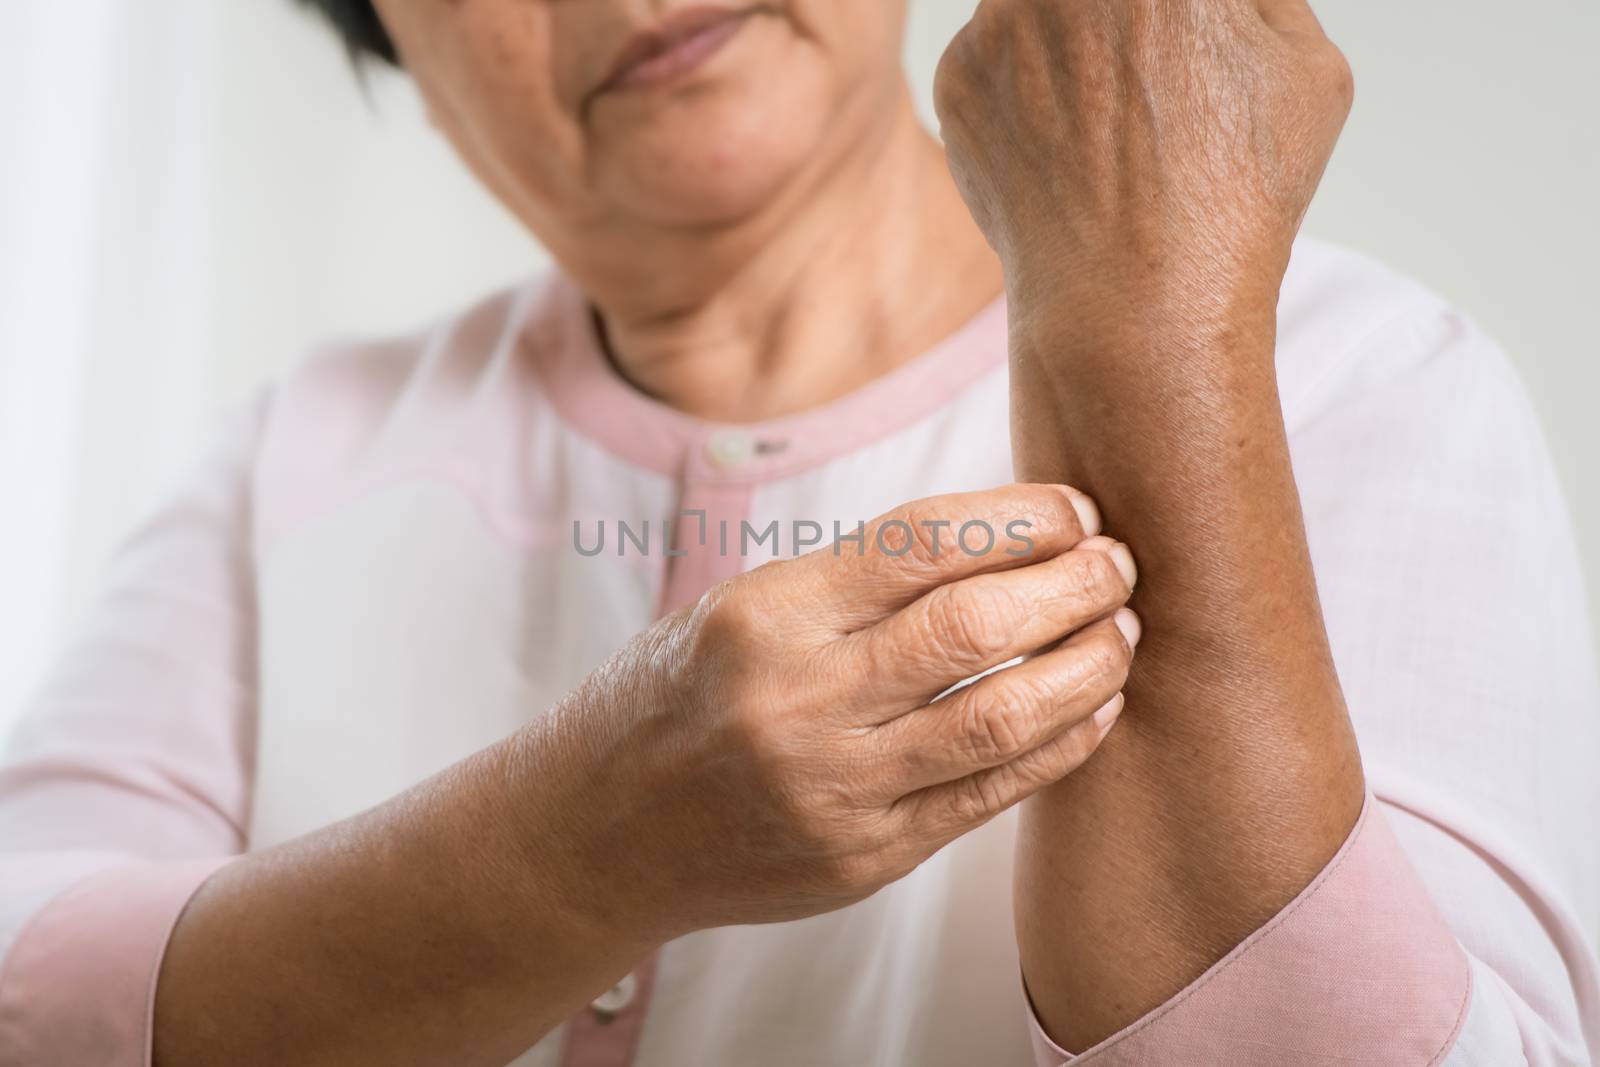 senior women scratch arm the itch on eczema arm, healthcare and medicine concept